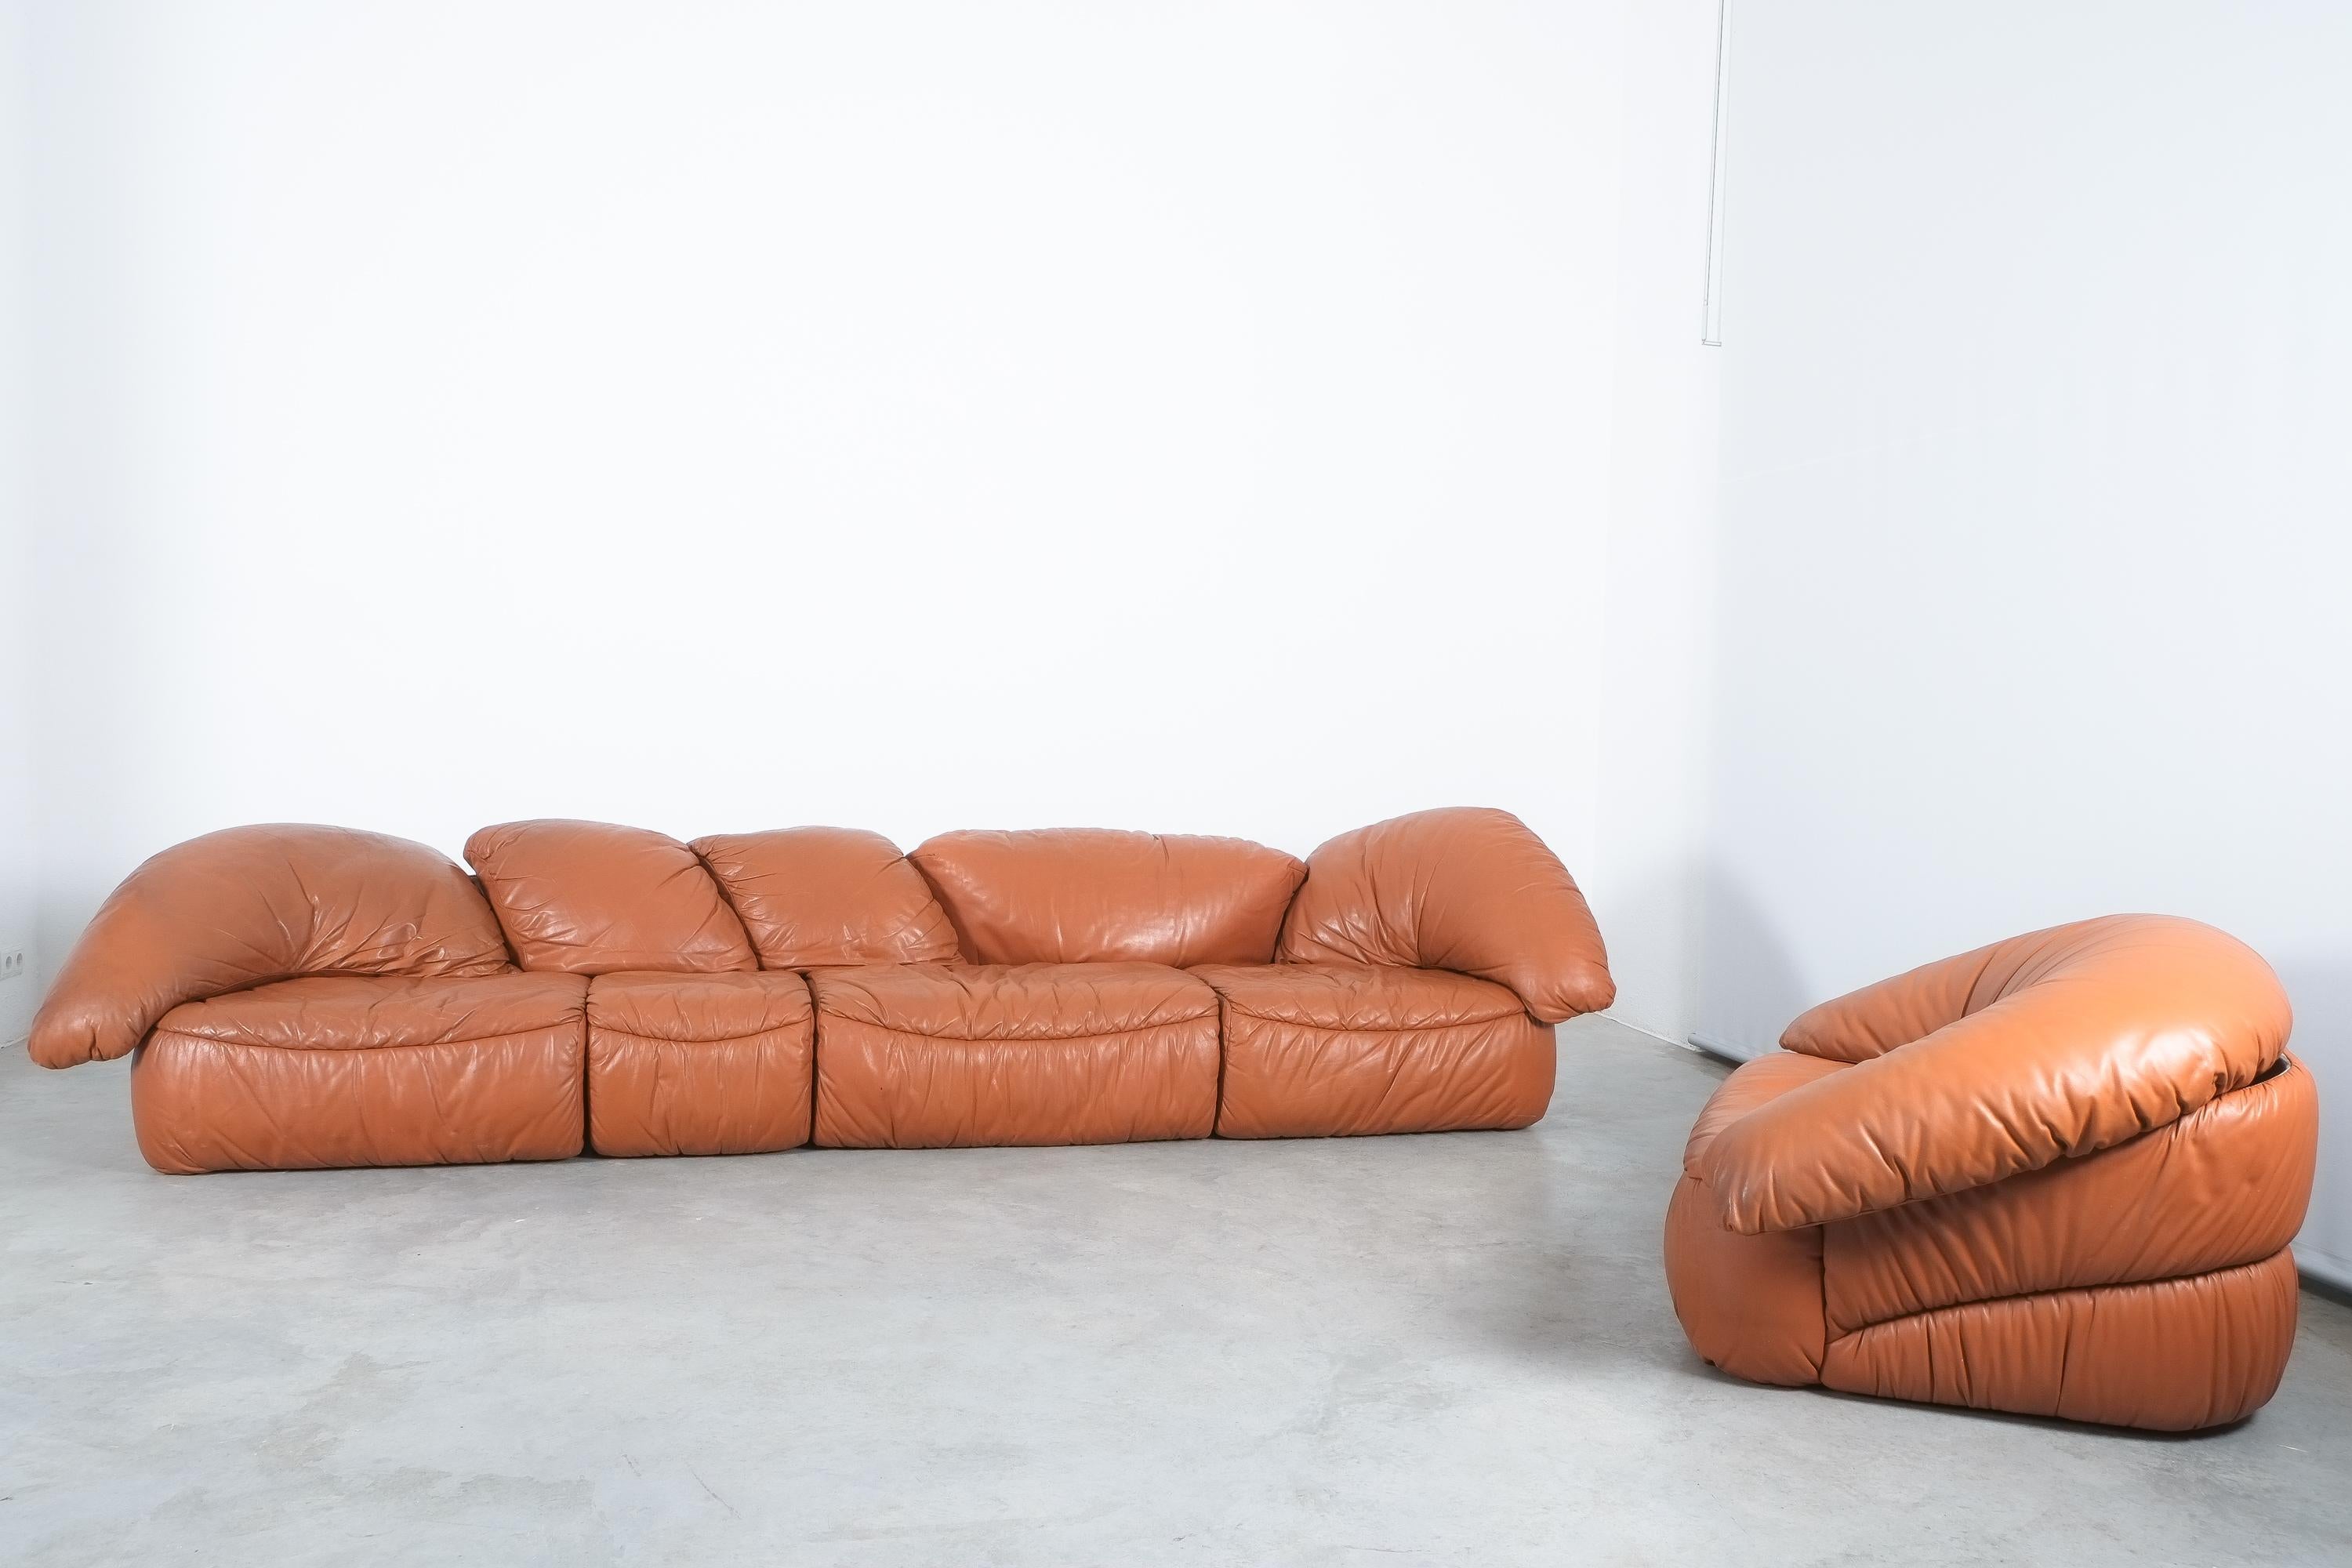 Rare vintage sculptural Croissant-ish Sofa Group (5 sectional elements + 1 chair) Wiener Werkstätte, Austria, circa 1970

Astonishingly well preserved freestanding mid-century sofa with a distinctive design and extraordinary shapes including one